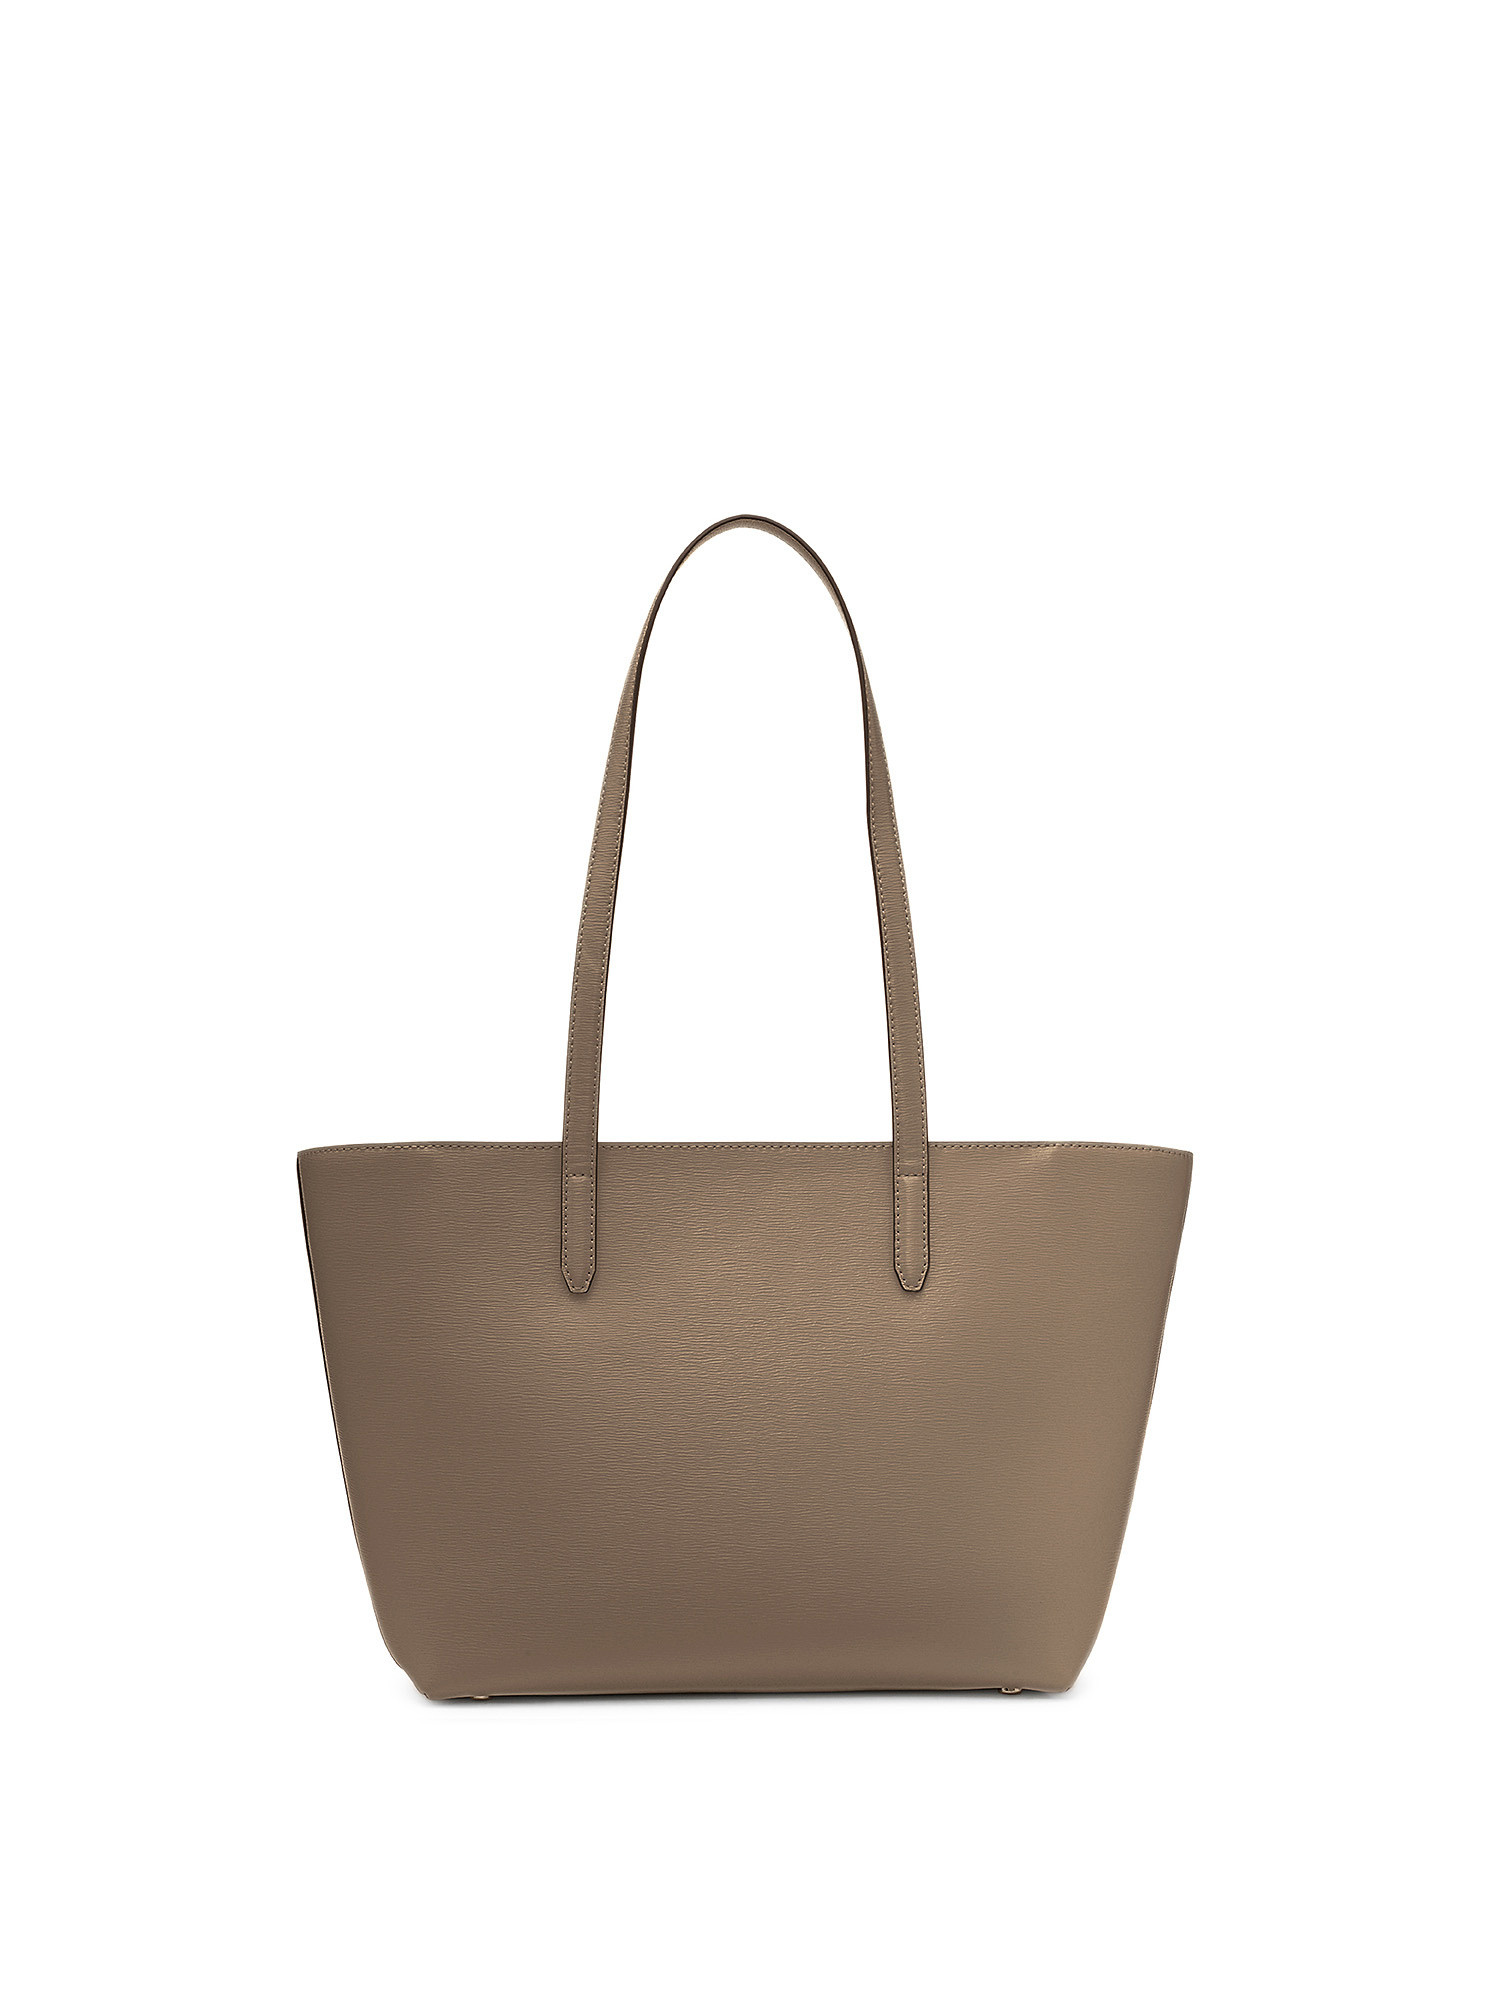 Dkny - Tote bag with removable accessory, Brown, large image number 2